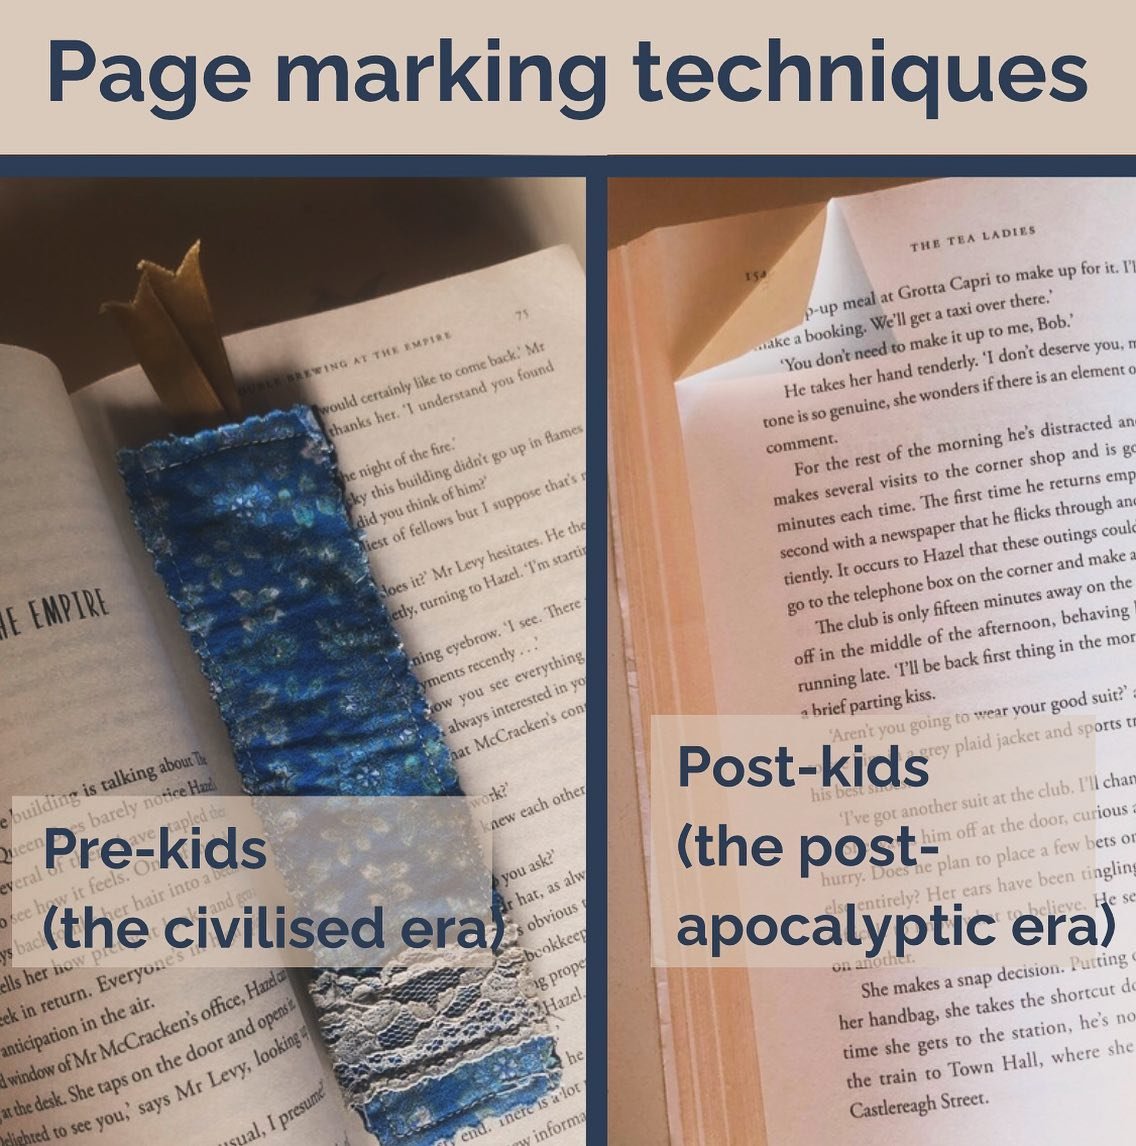 Me pre-kids: what kind of uncouth barbarian would ever hesitate to use a bookmark? They&rsquo;re such simple and effective instruments for page marking. Why would someone damage a book so unnecessarily?

Me post-kids: Crap, what page was I up to? Why